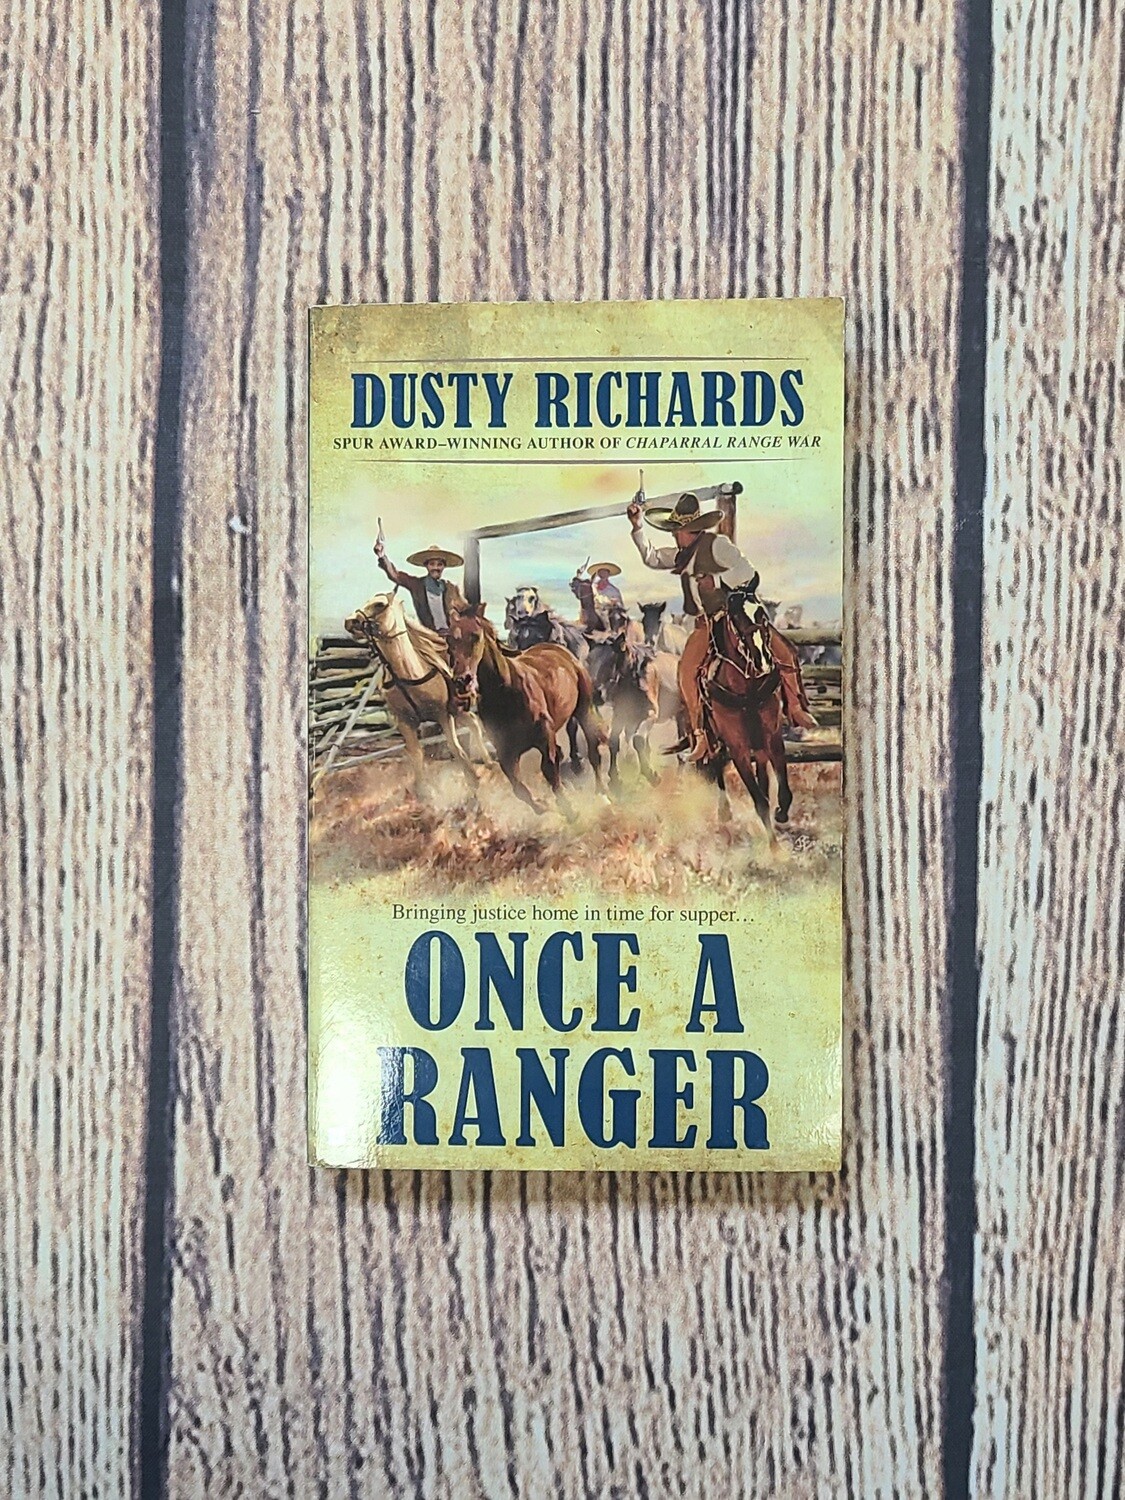 Once a Ranger by Dusty Richards